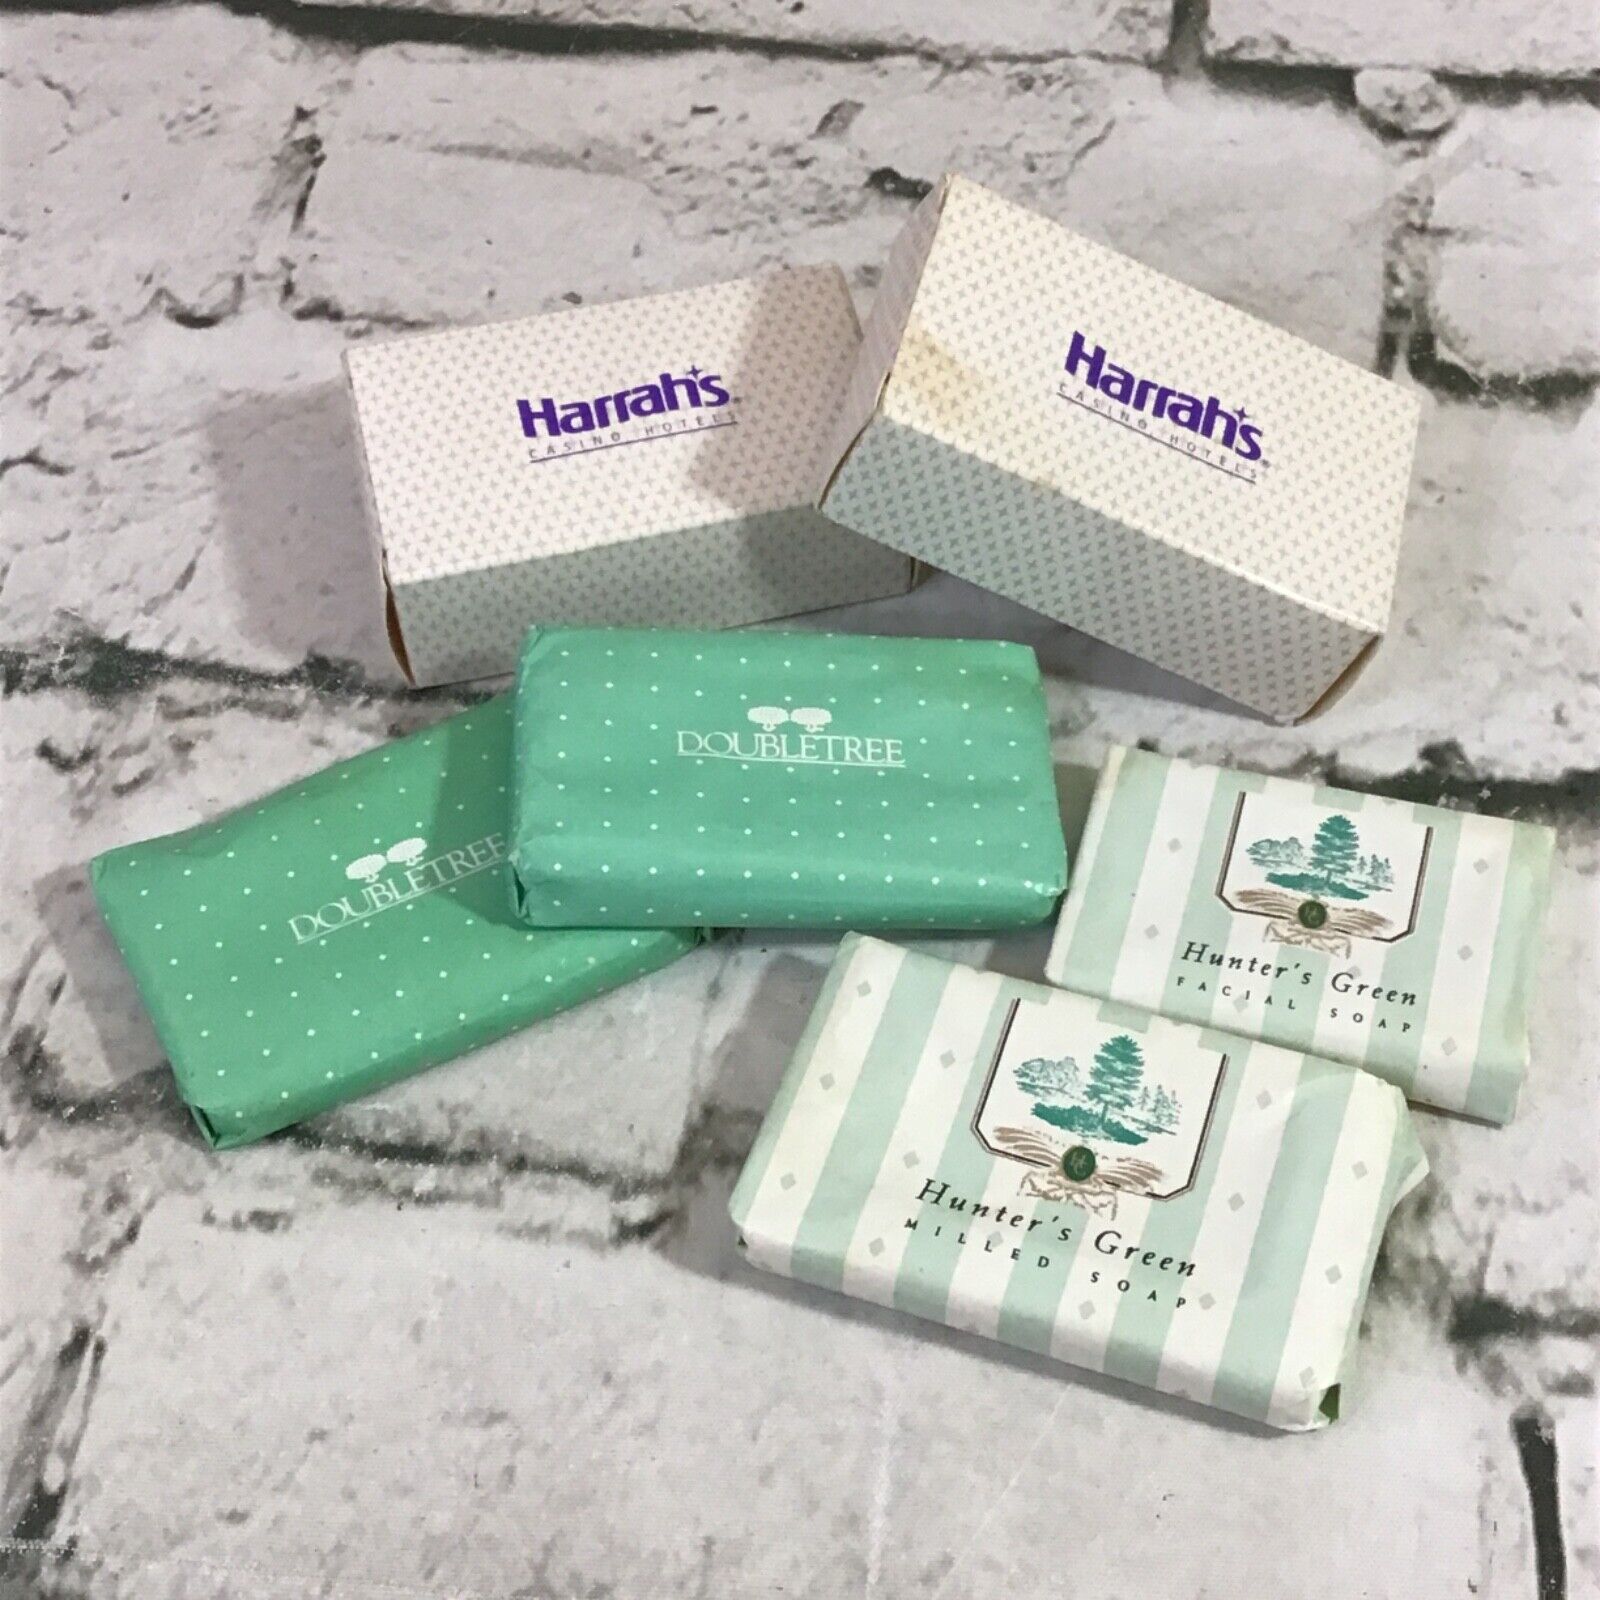 Hotel Travel Soaps Collectible Lot Of 6 Harrah’s Double Tree Hunter’s Green